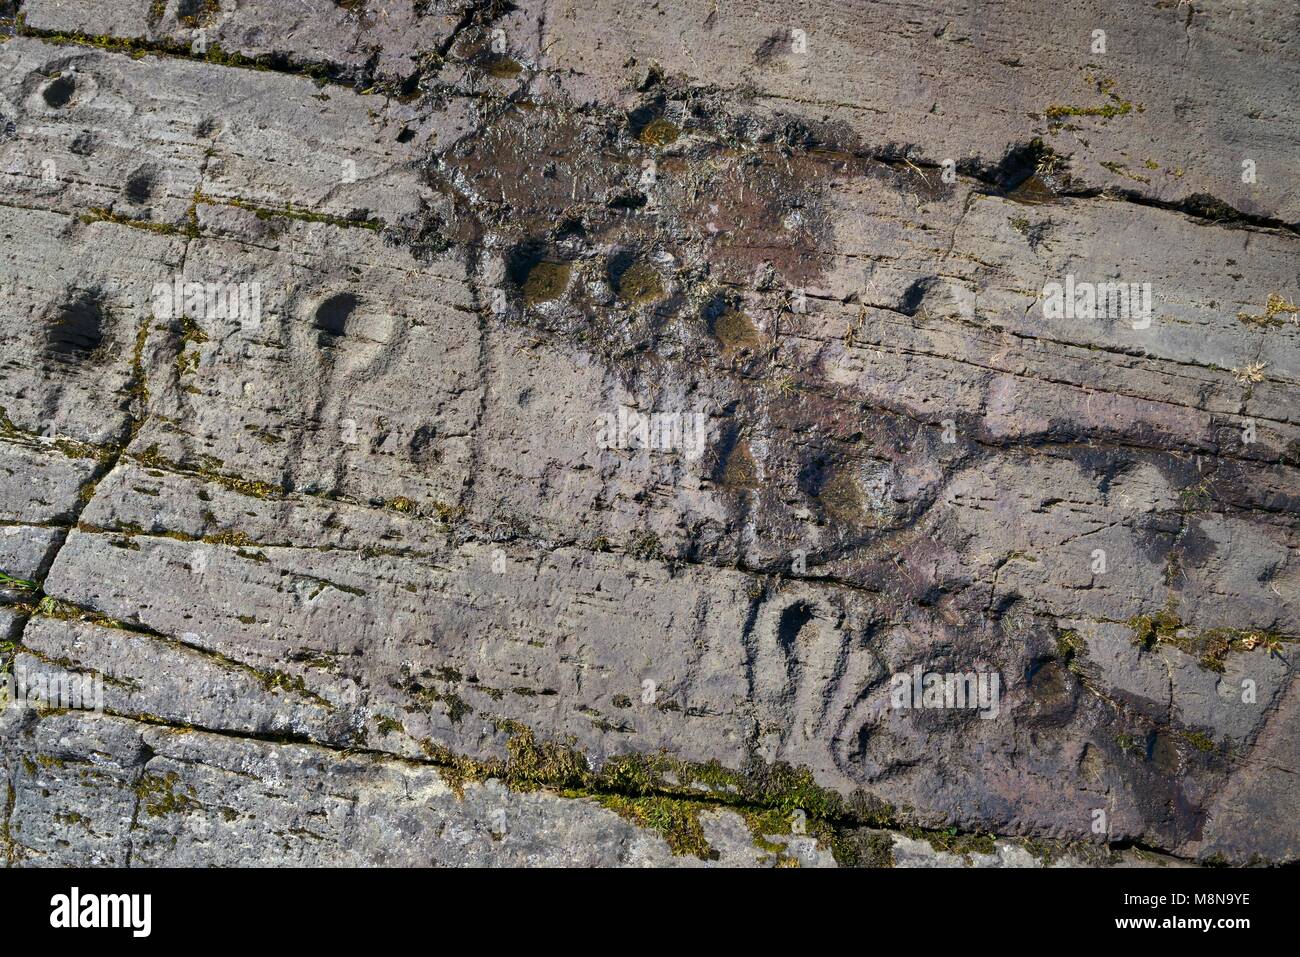 Cup and ring mark marks prehistoric Neolithic rock art on natural rock outcrop at Kilmichael Glassary in Kilmartin Valley, Argyll, Scotland, UK Stock Photo